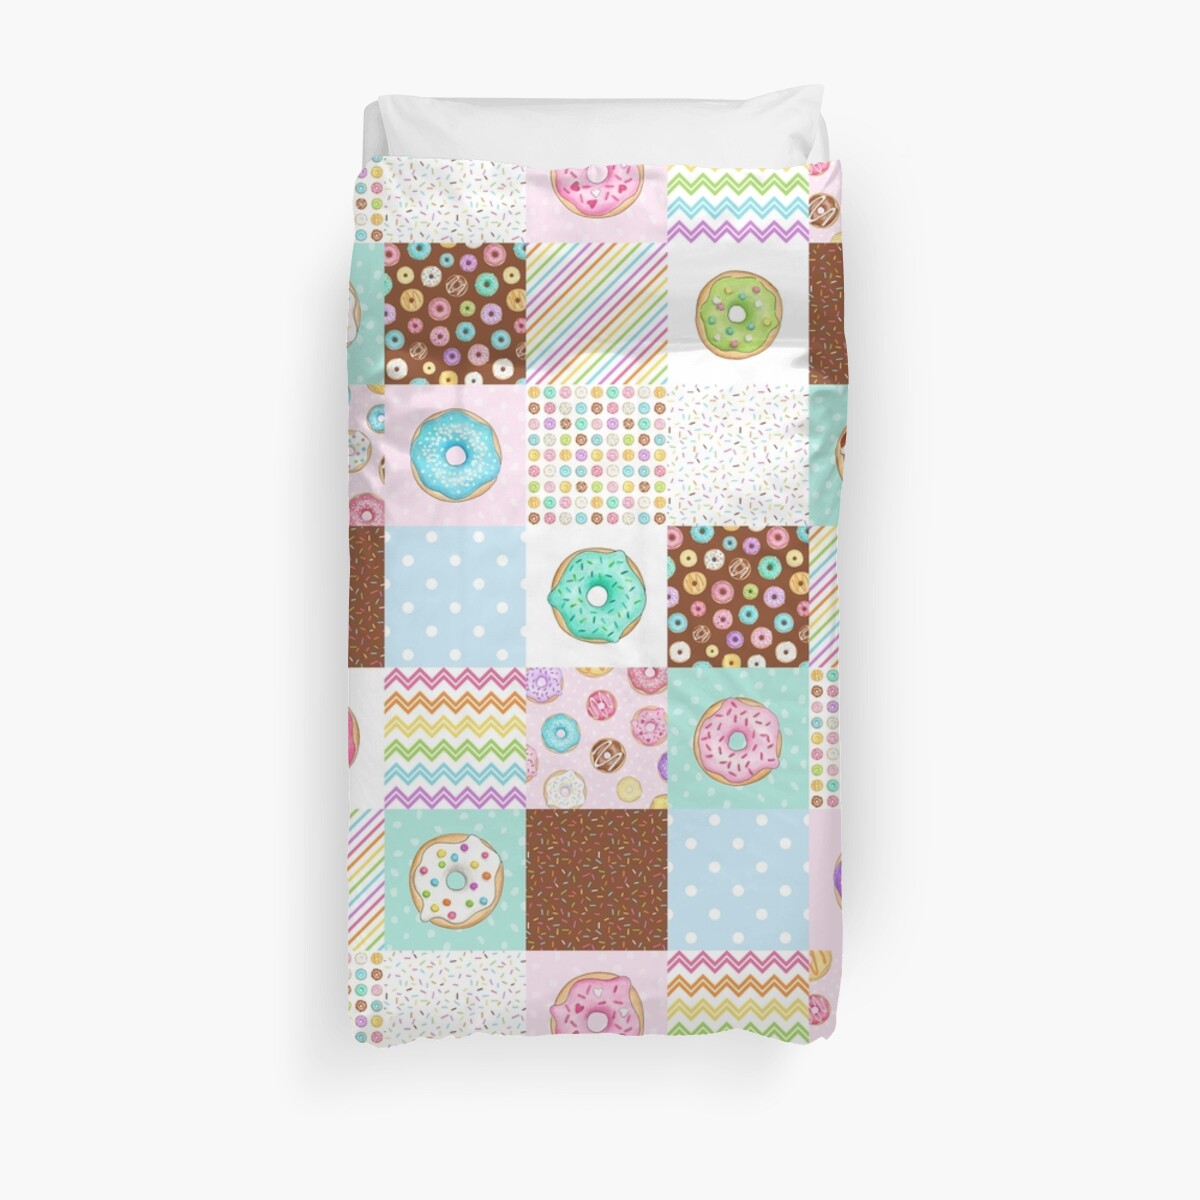 Rainbow Donuts Patchwork Quilt Pattern Duvet Cover By Hazelfisher